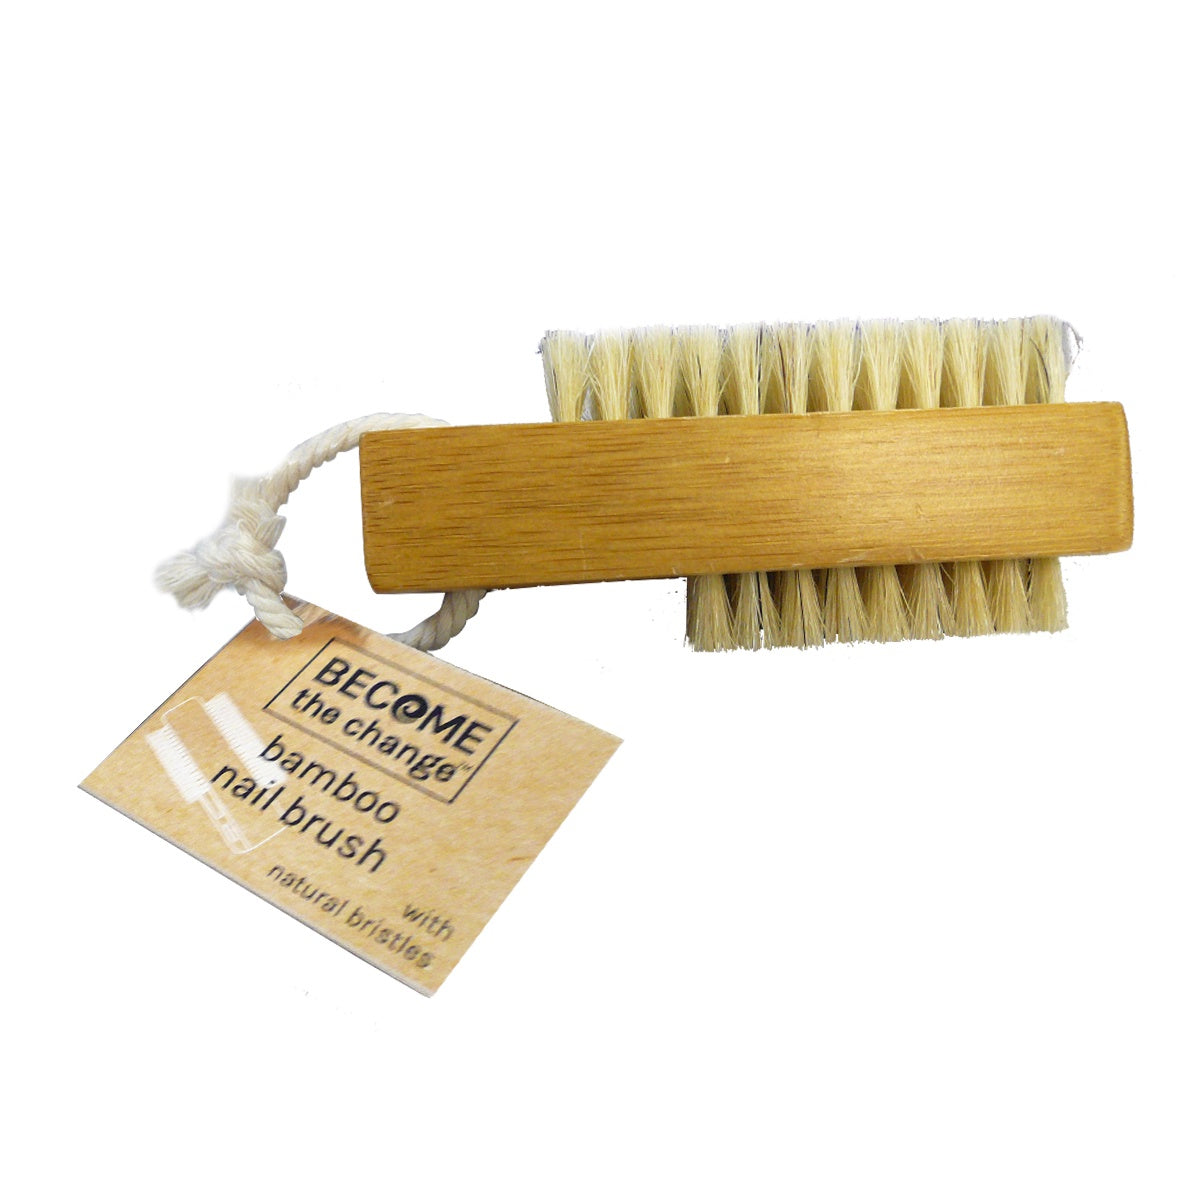 Become The Change Bamboo Nail Brush